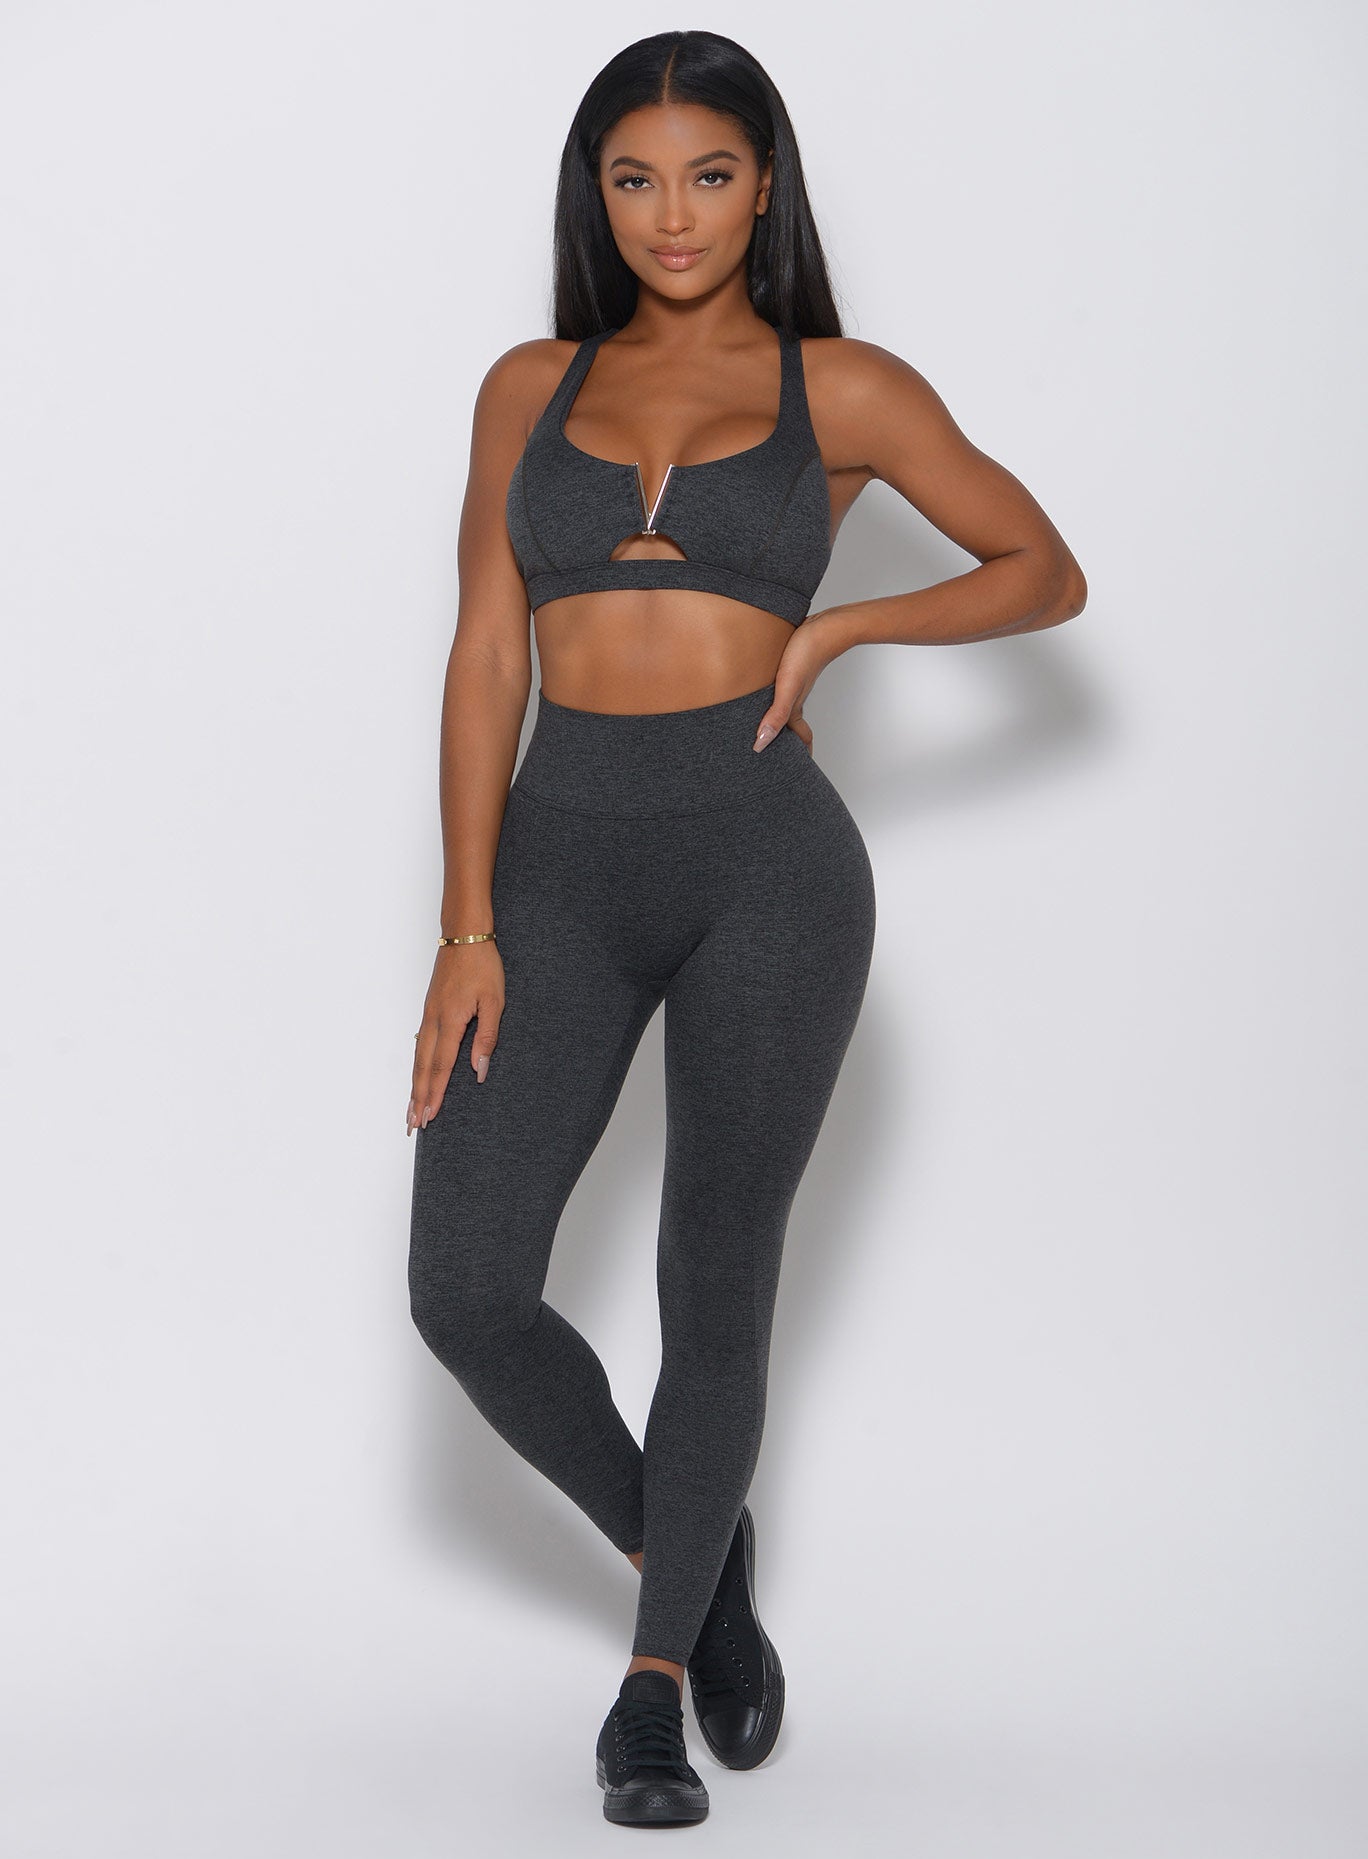 Front view of the model in a high waist gray leggings with a V back design